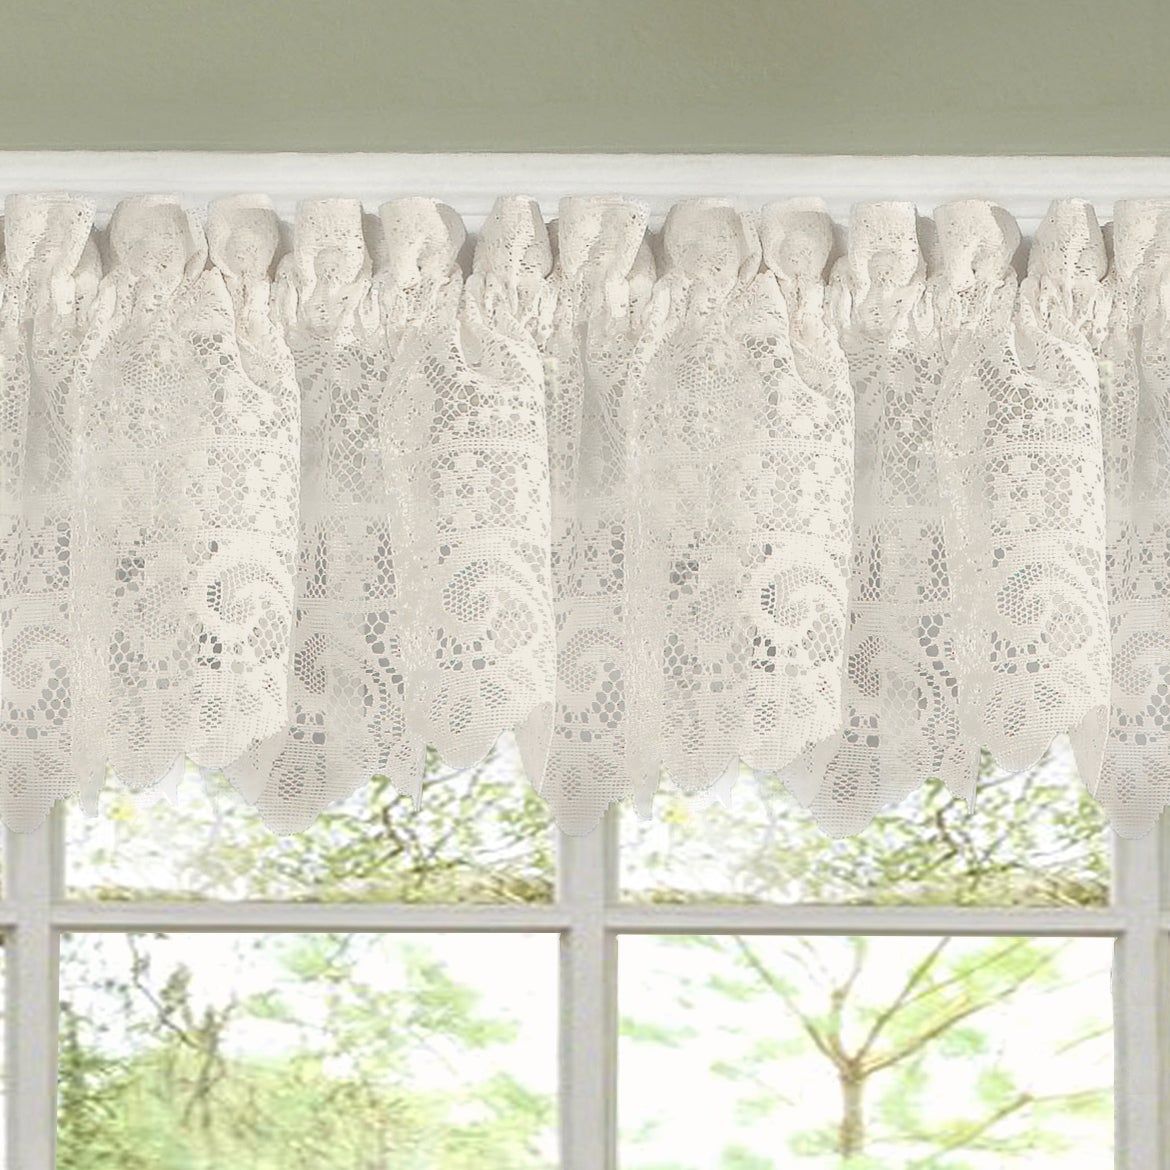 Luxurious Old World Style Lace Kitchen Curtains  Tiers And Valances In  Cream | Overstock Shopping – The Best Deals On Valances Intended For Luxurious Old World Style Lace Window Curtain Panels (View 6 of 20)